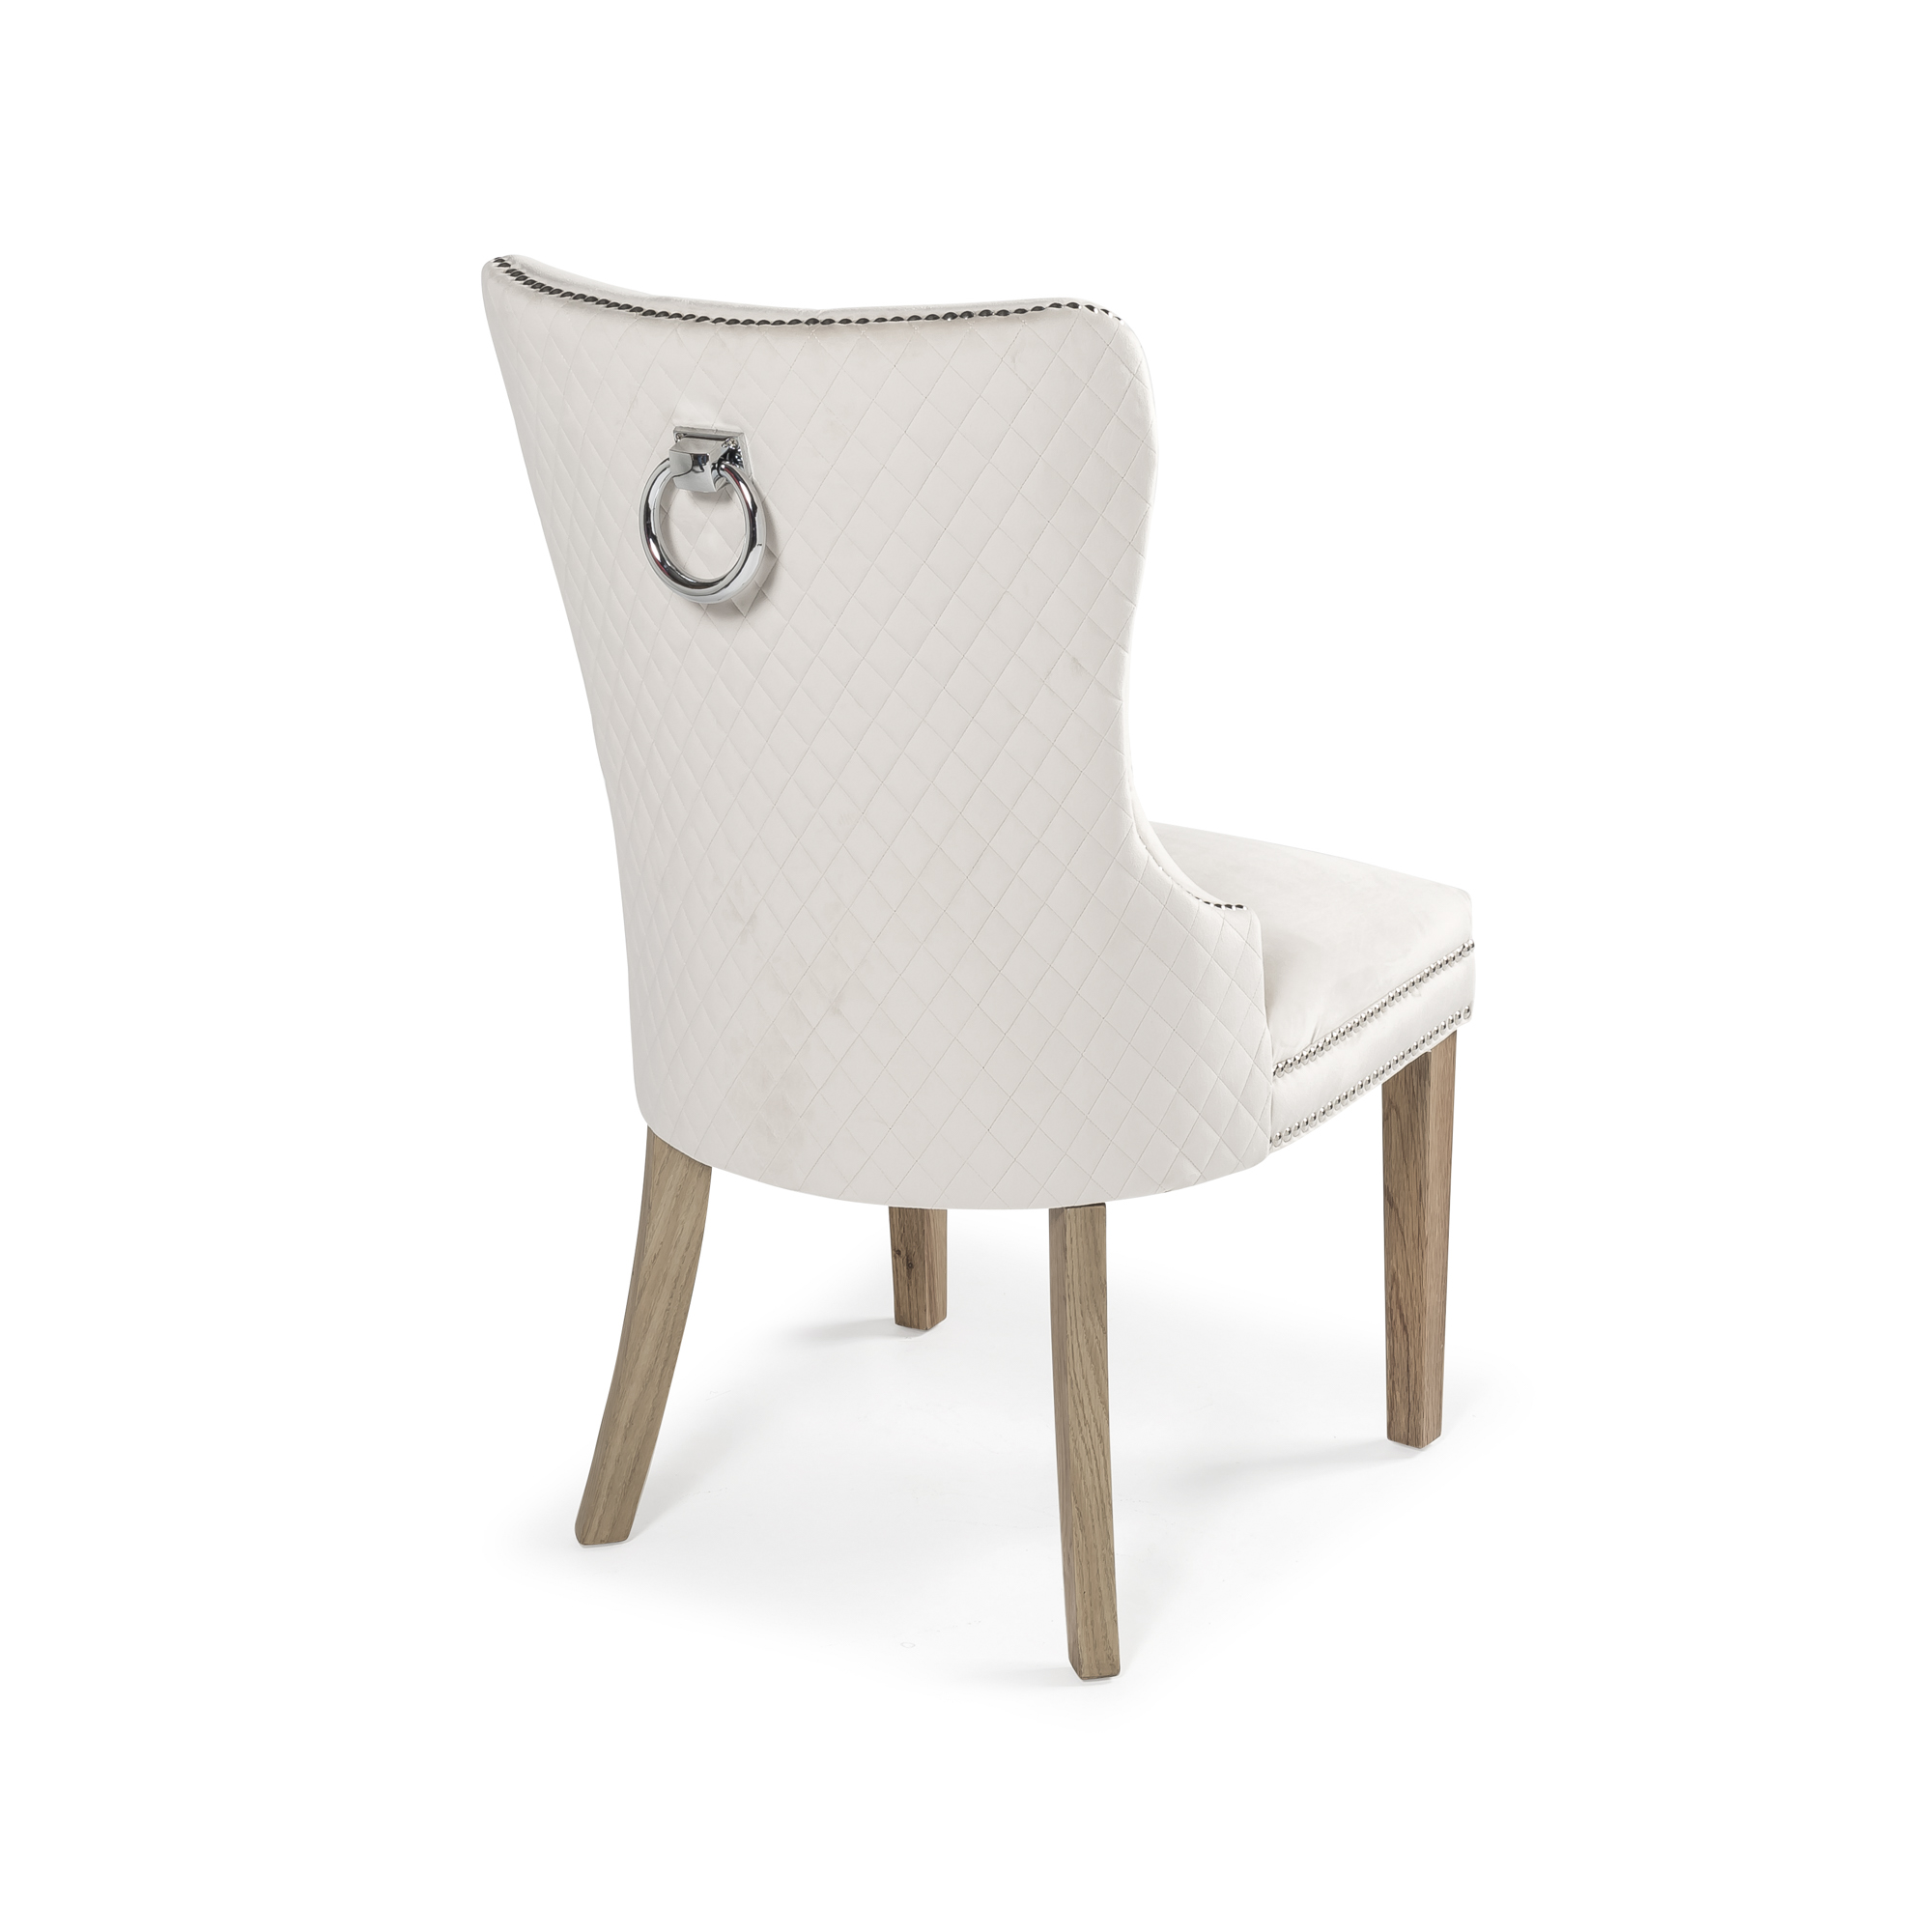 Hale Cream Quilted Brushed Velvet Studded Dining Chair with Hoop Handle – Oak Legs